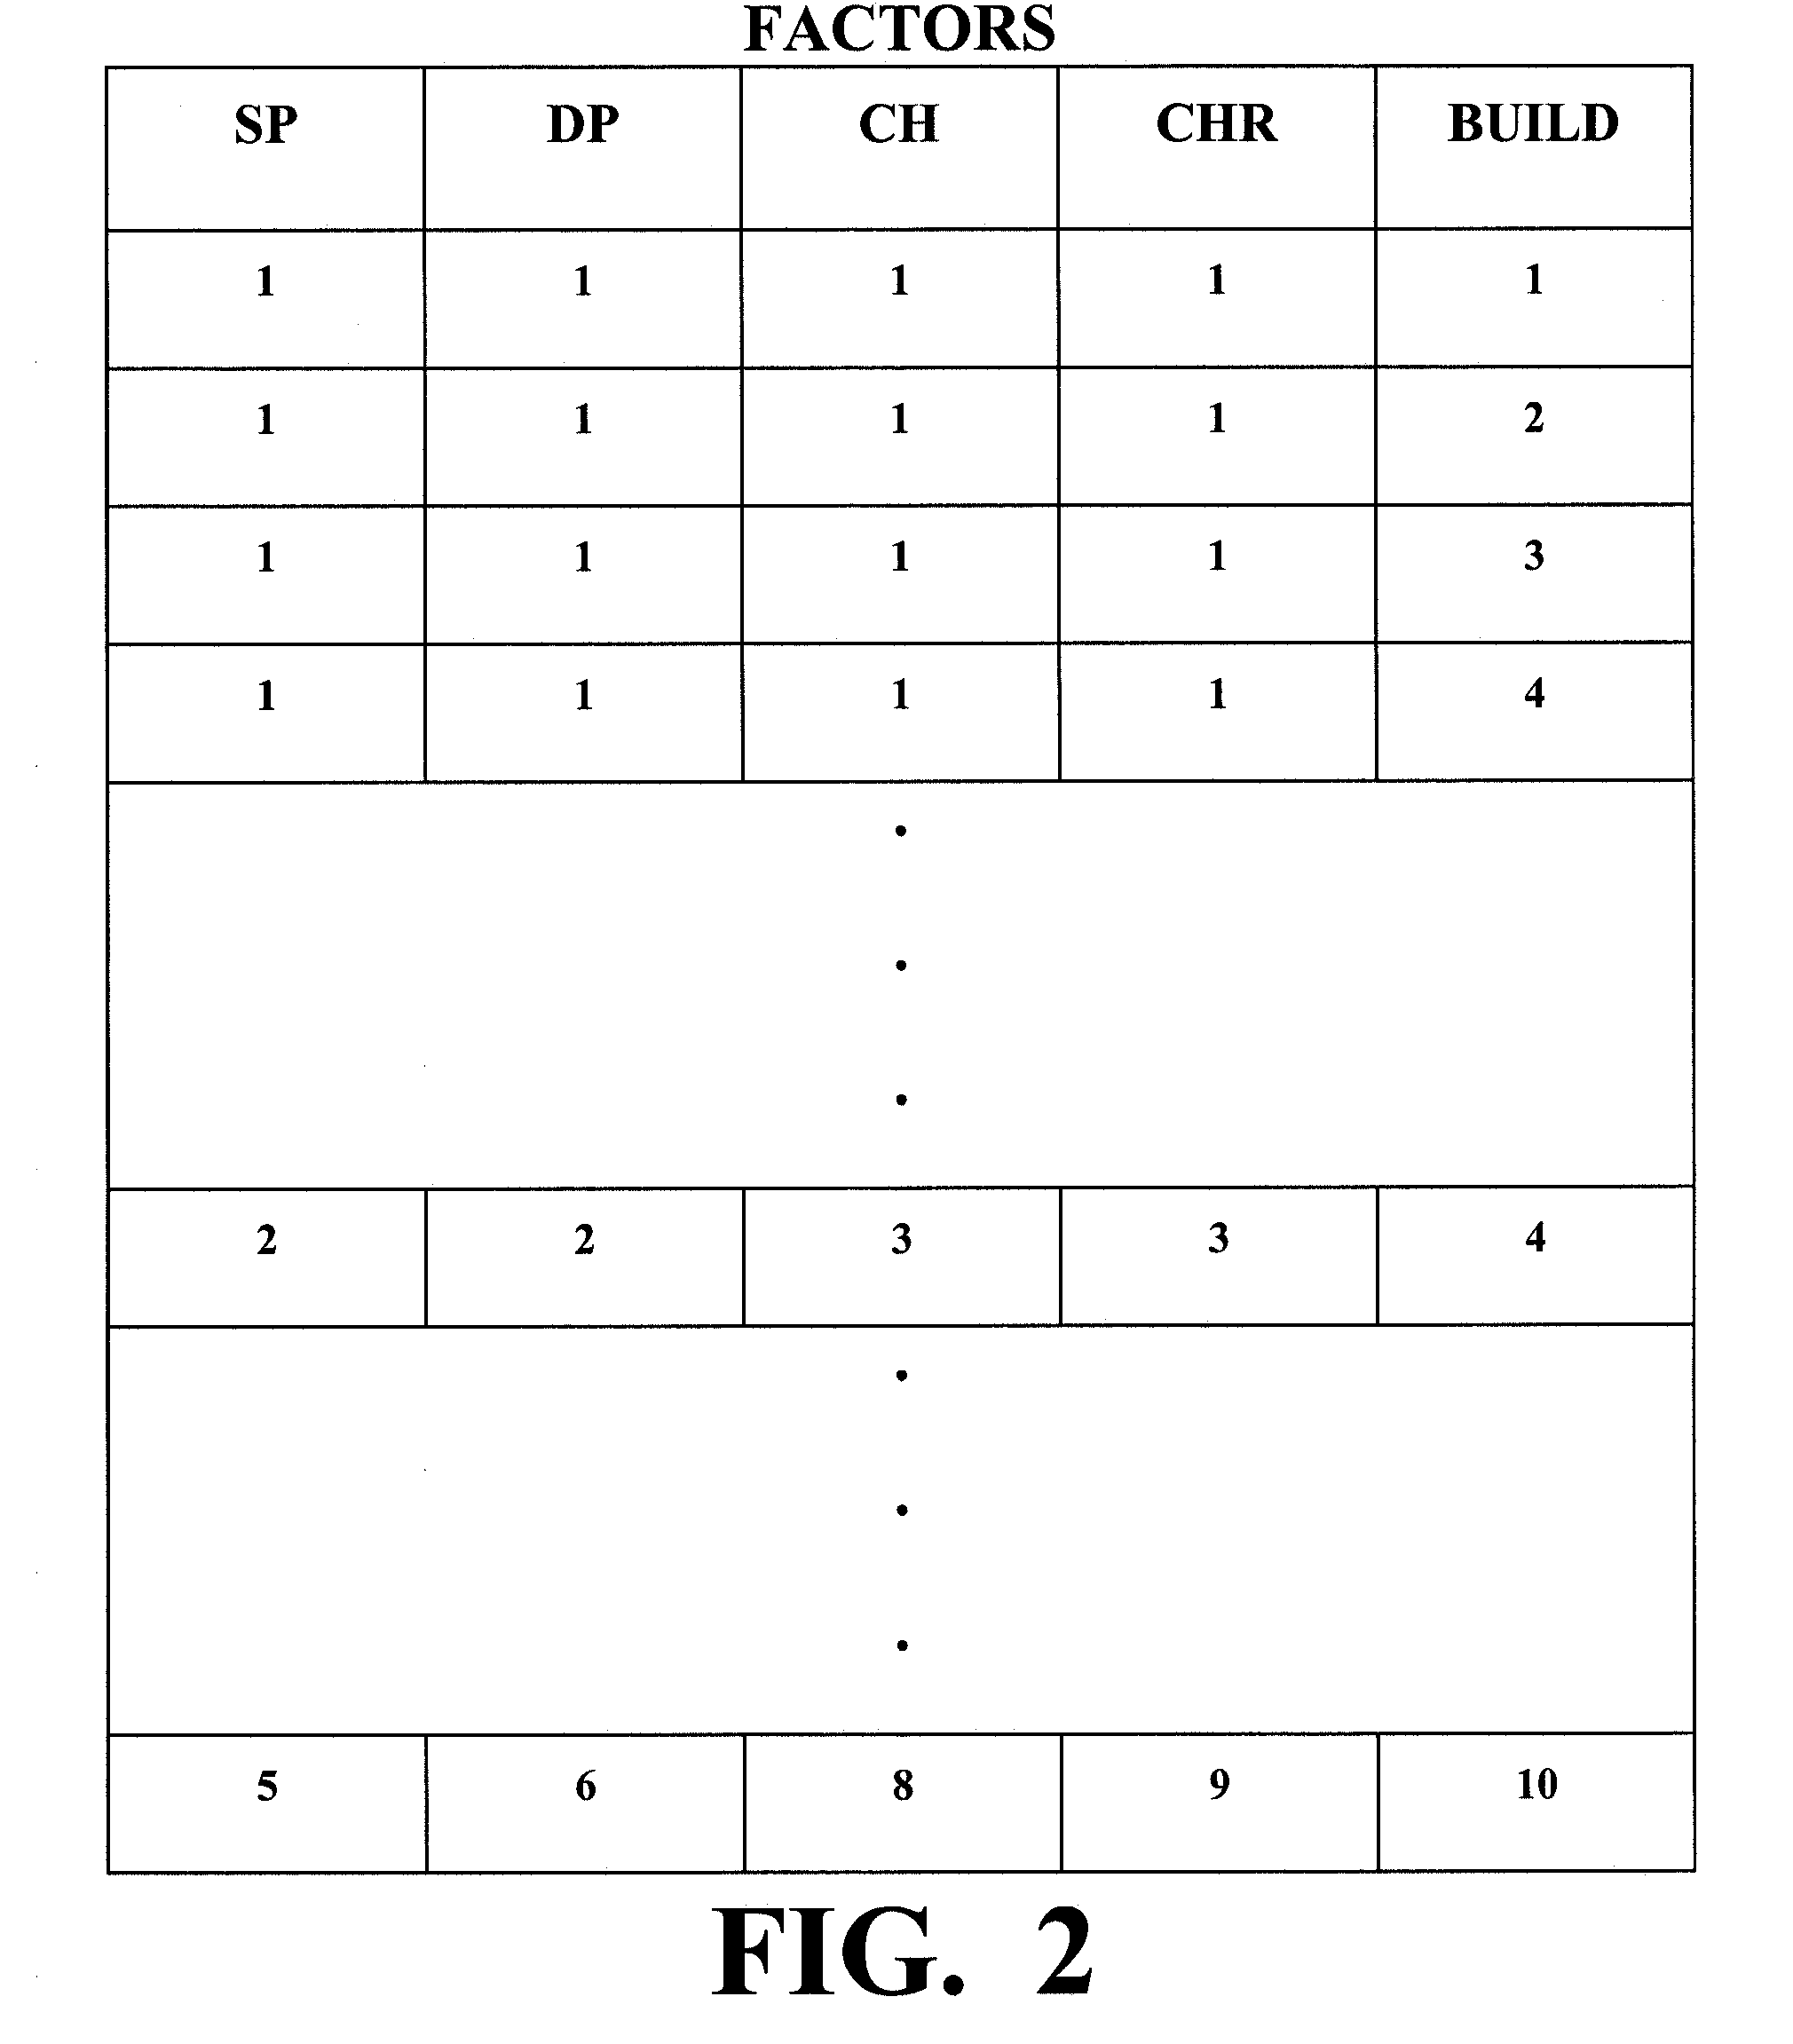 System and Method for Developing Loss Assumptions